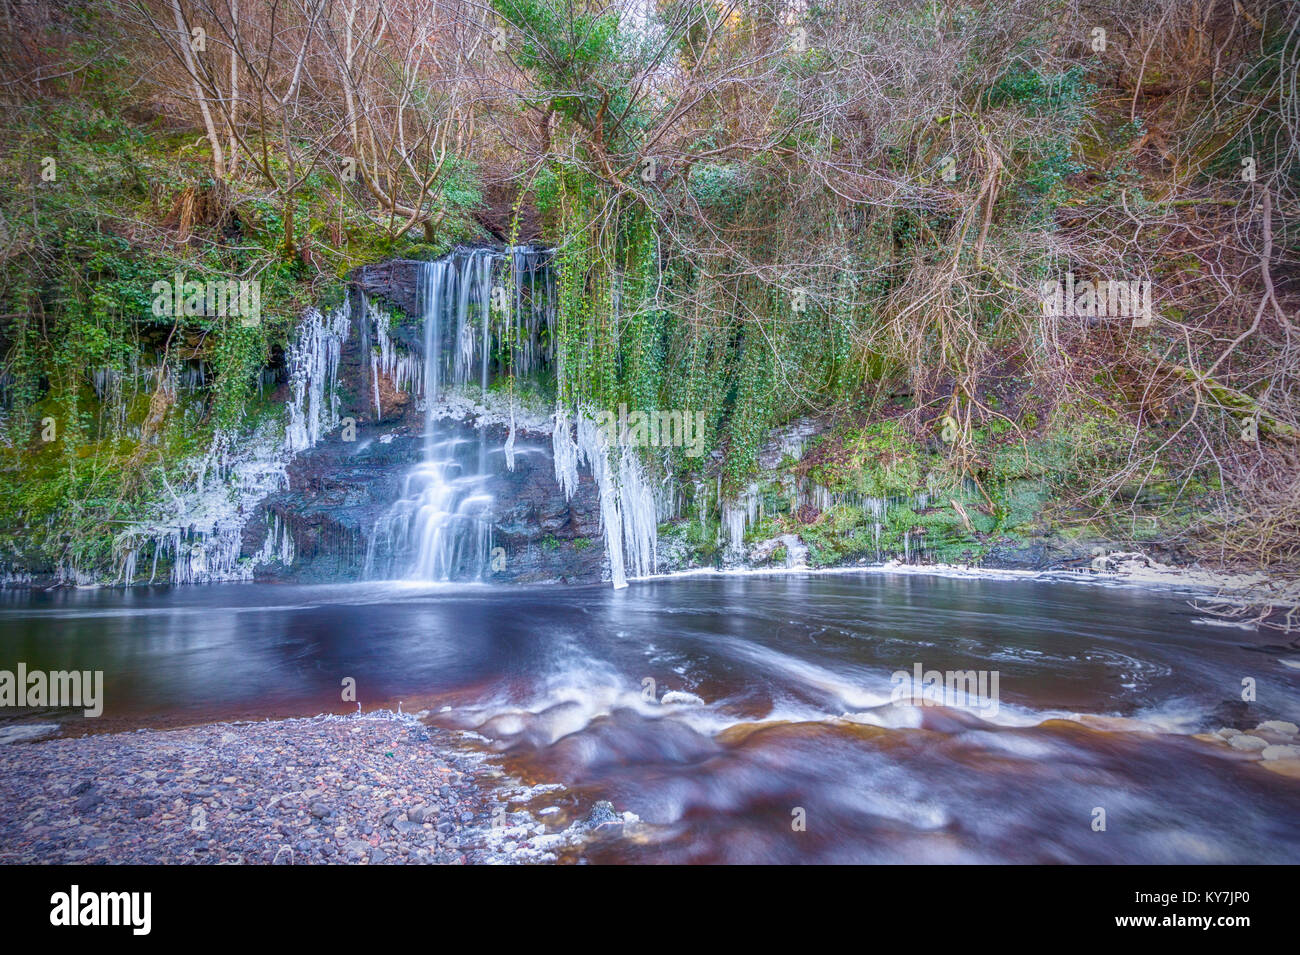 This waterfall sits in a gorge in Calderwood Country Park, between East and Mid Calder, West Lothian.The river in the foreground is the Linhouse Water Stock Photo